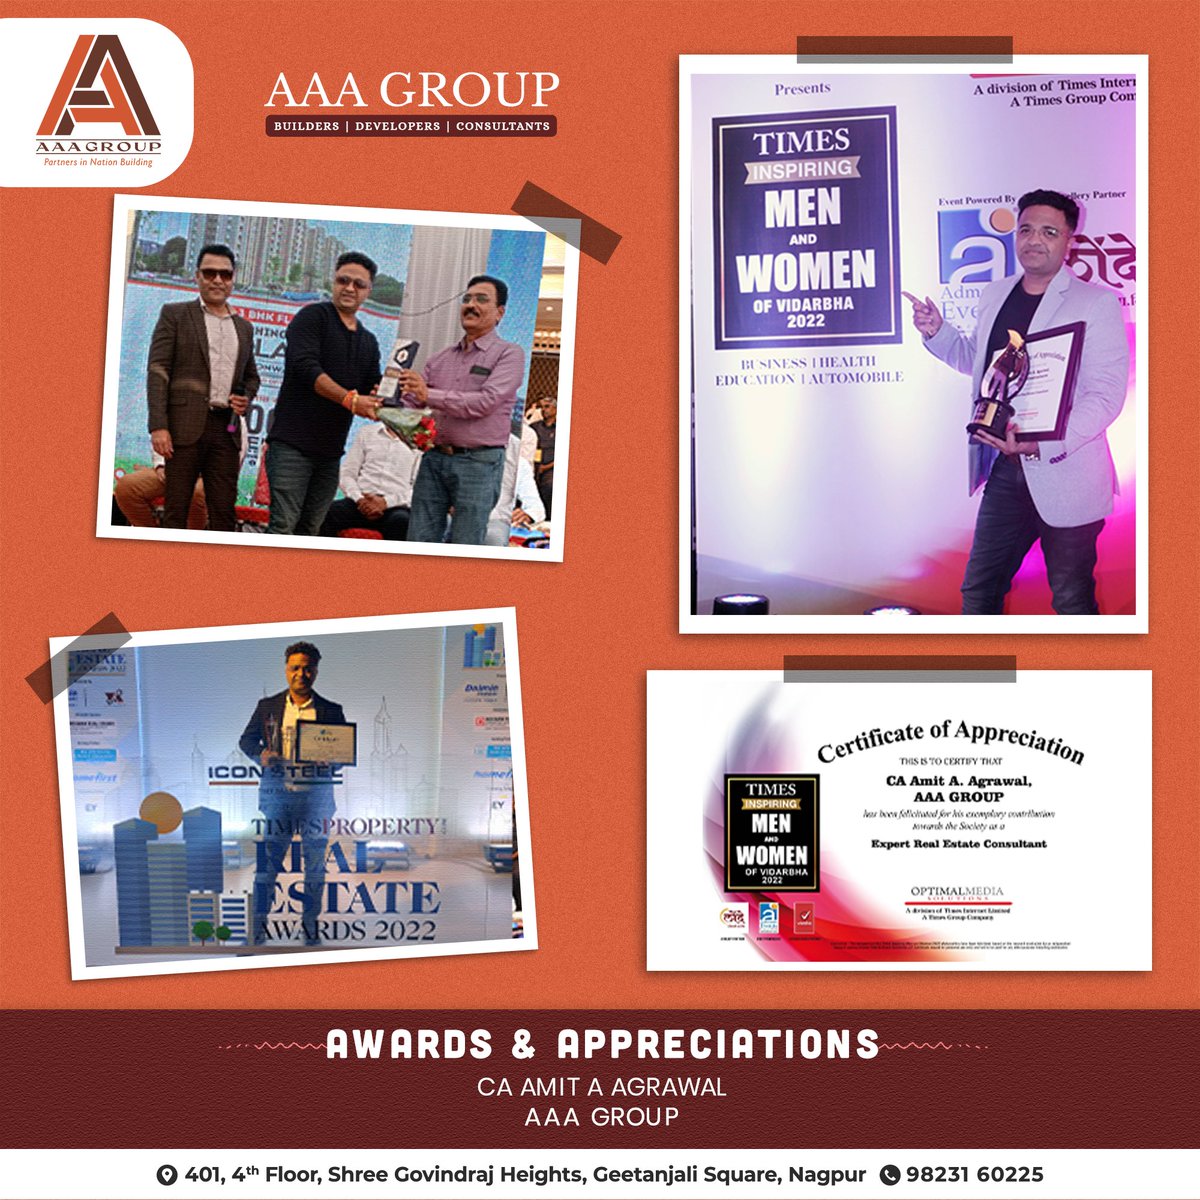 Celebrating the Achievements: A Trailblazing Journey in Real Estate by CA Amit A. Agrawal - Promoter, AAA Group, India.
#AAAGroup
.
.
.
#NagpurRealEstate #MaharashtraProperty #DreamHome #InvestInNagpur #LuxuryLiving #AAAProperties #RealEstateNagpur #IndiaProperty #BuyWithAAA